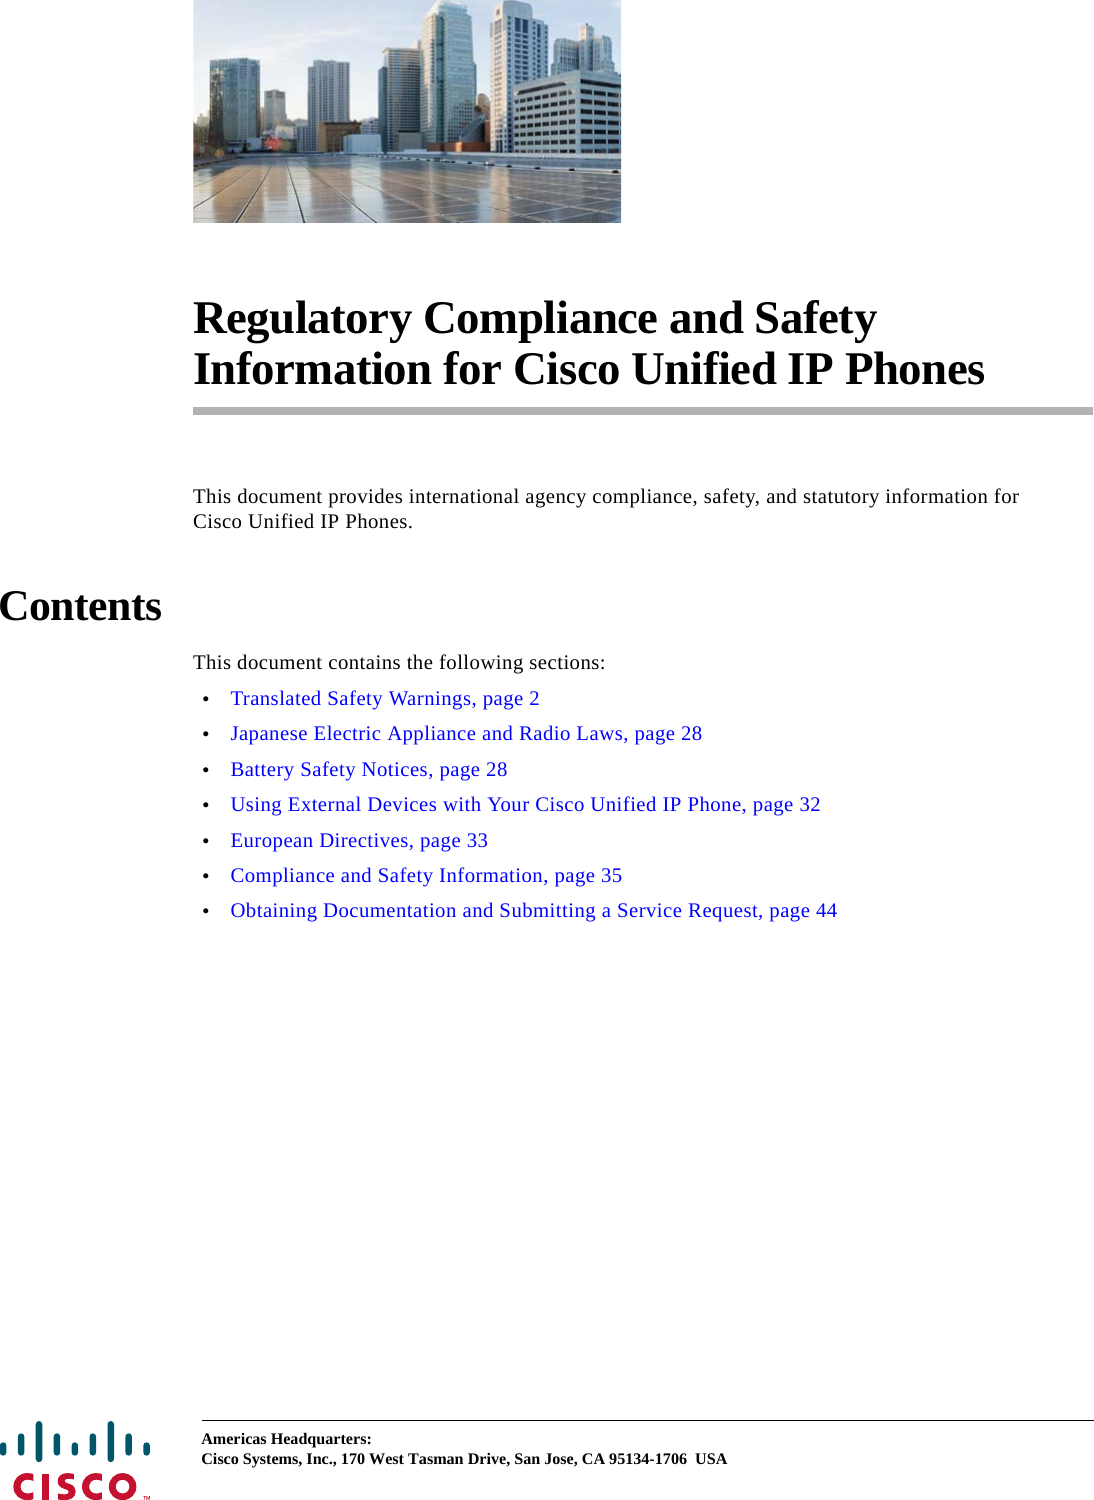  Americas Headquarters:Cisco Systems, Inc., 170 West Tasman Drive, San Jose, CA 95134-1706 USARegulatory Compliance and Safety Information for Cisco Unified IP PhonesThis document provides international agency compliance, safety, and statutory information for Cisco Unified IP Phones.ContentsThis document contains the following sections:•Translated Safety Warnings, page 2•Japanese Electric Appliance and Radio Laws, page 28•Battery Safety Notices, page 28•Using External Devices with Your Cisco Unified IP Phone, page 32•European Directives, page 33•Compliance and Safety Information, page 35•Obtaining Documentation and Submitting a Service Request, page 44